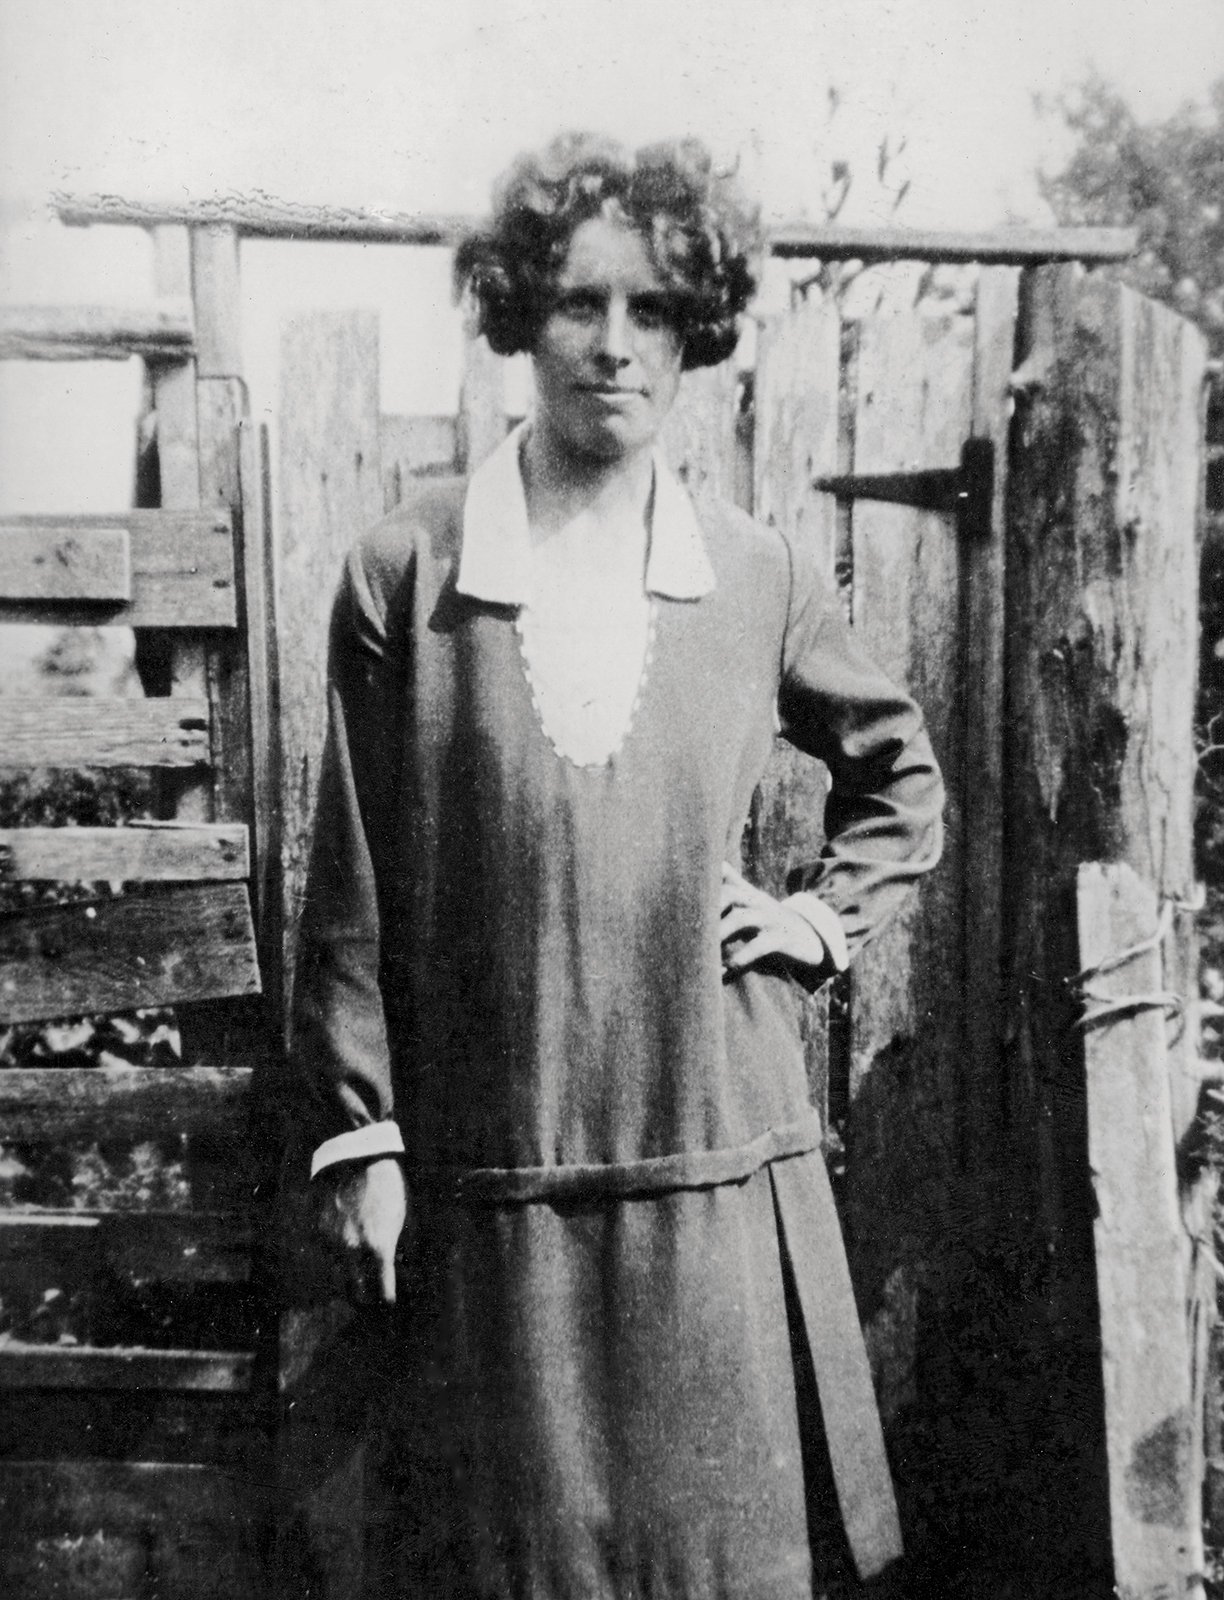 Lena (O’Driscoll) Dwyer, mother of Mike, at her home in Eyriesbeg, Beara, County Cork, c. 1920s.